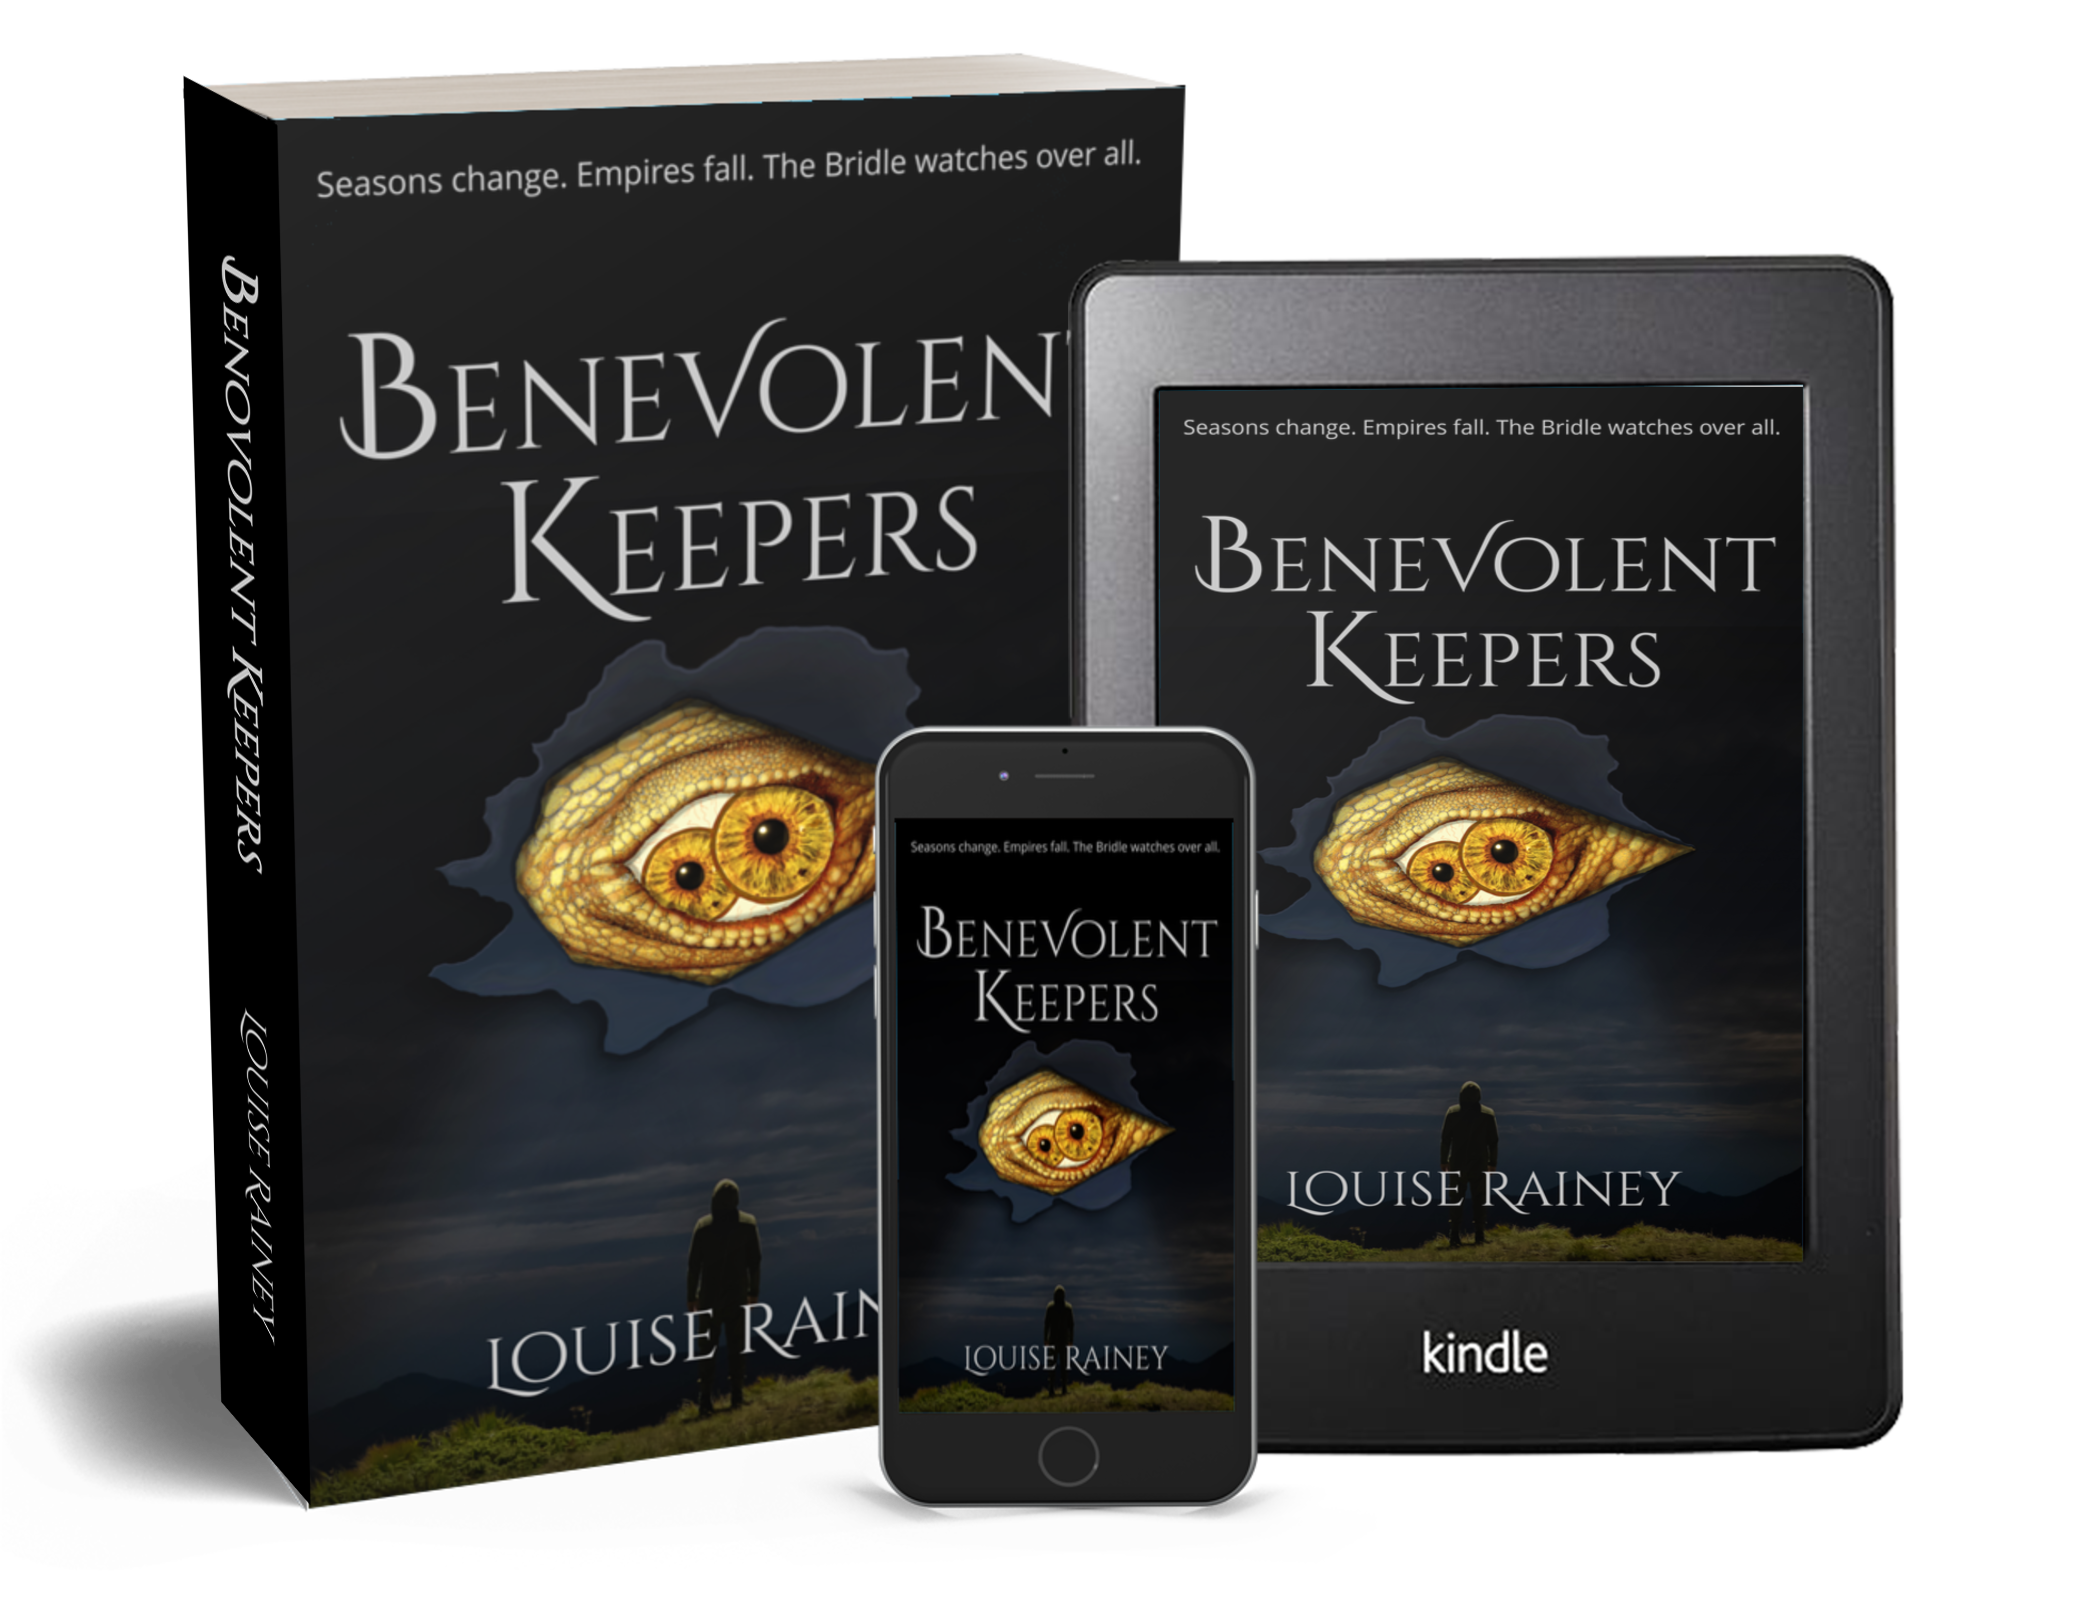 Benevolent Keepers by Louise Rainey